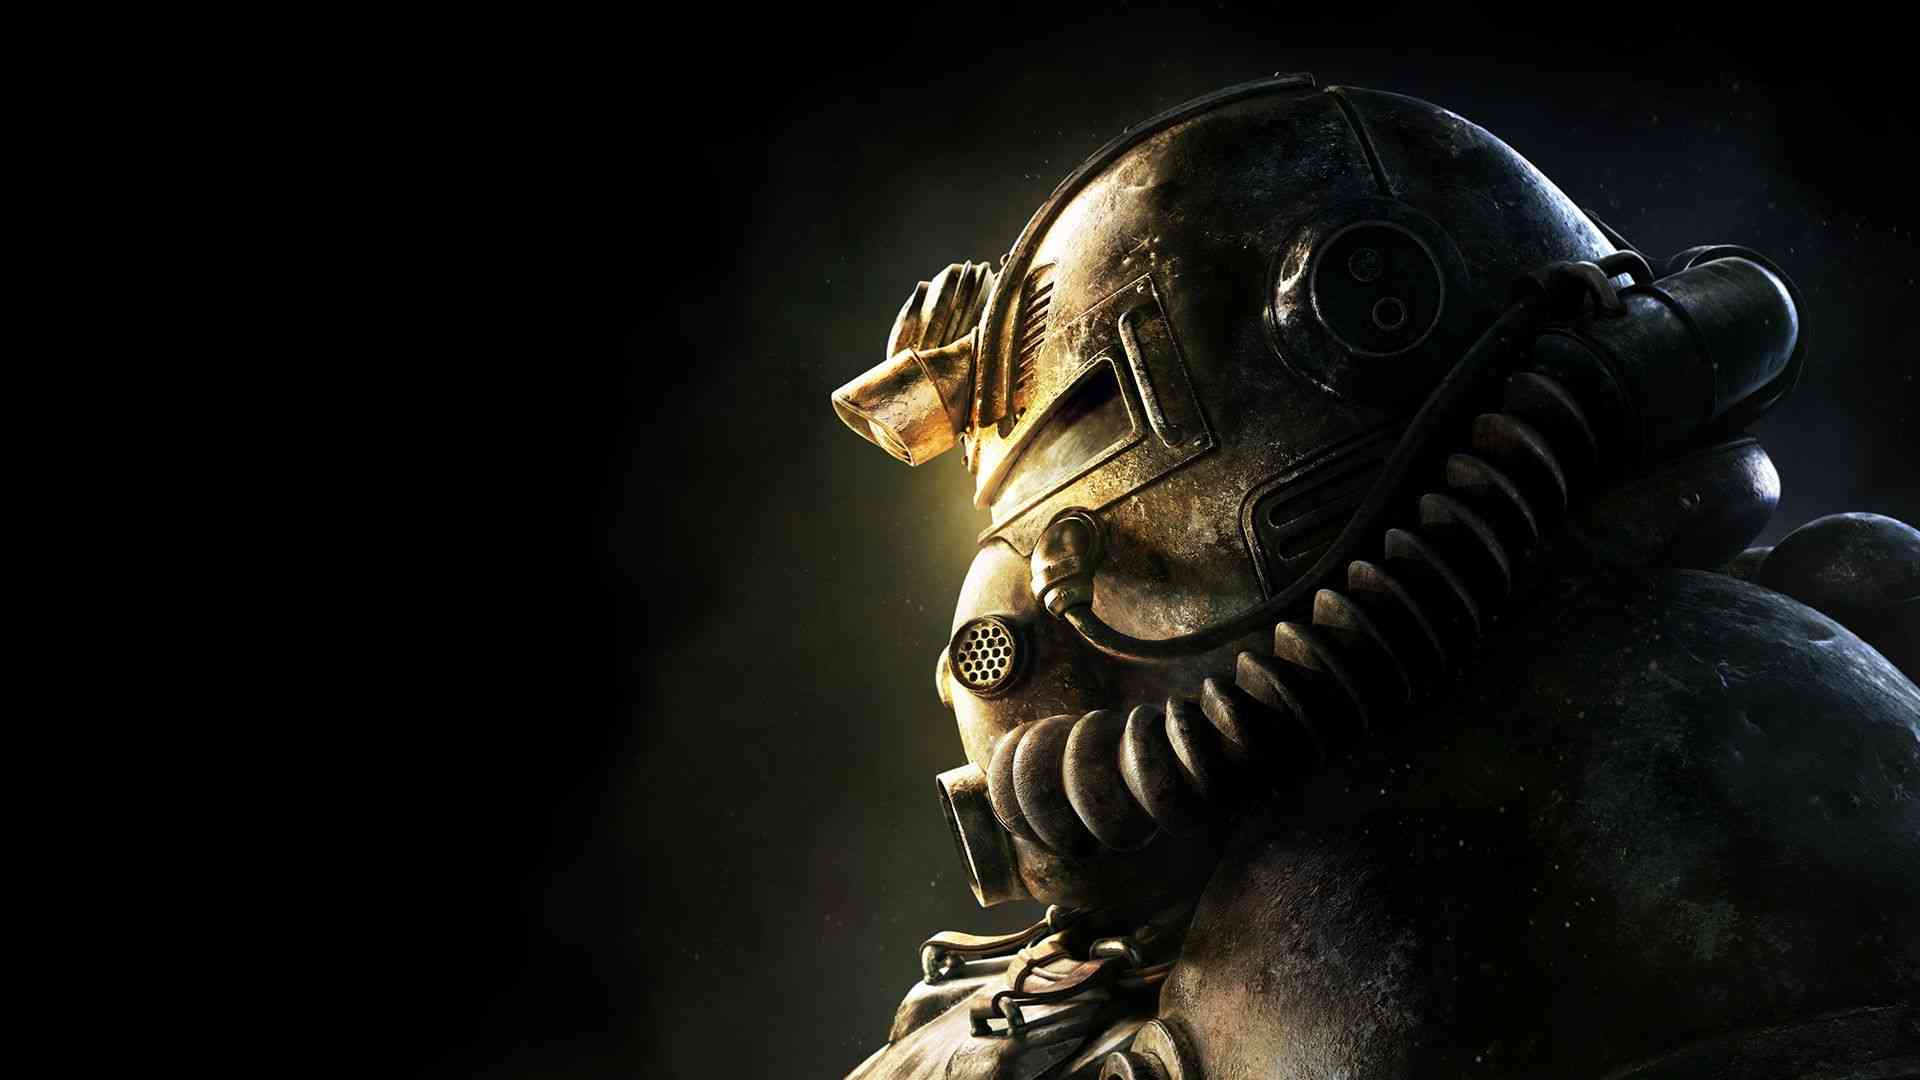 bethesda placeholders appear on amazon is a new game coming 1756 big 1